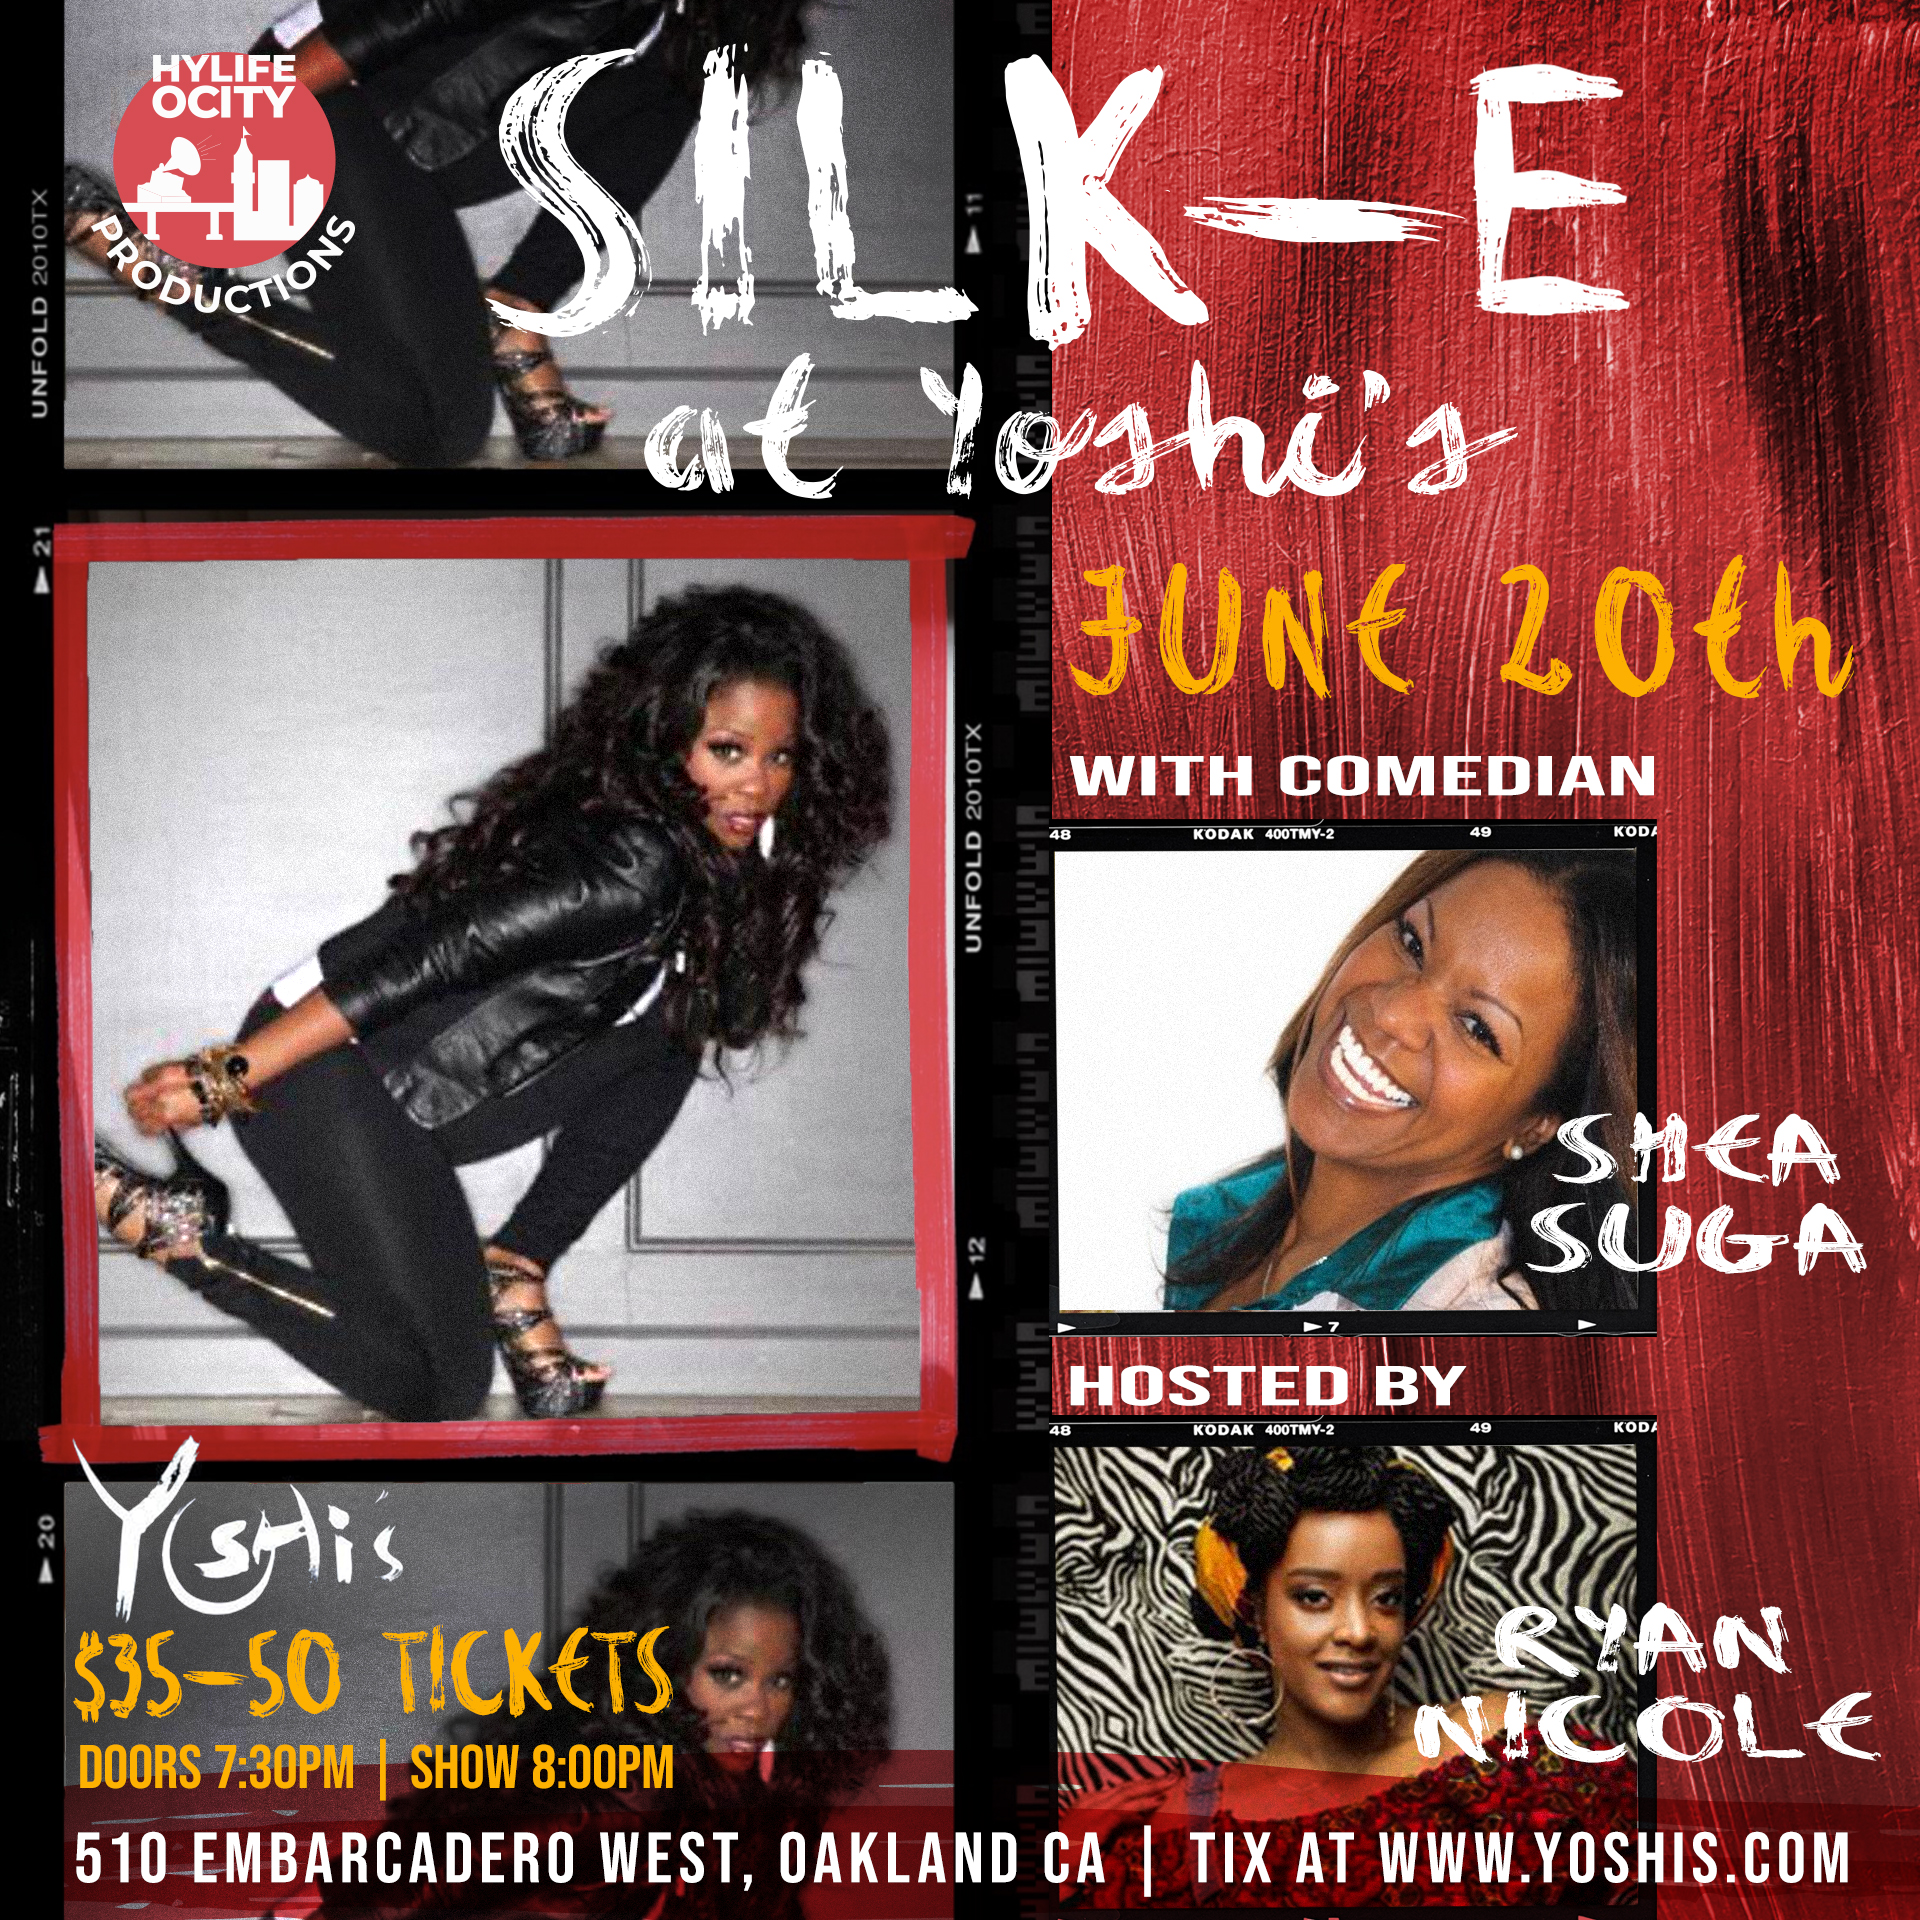 Image for SILK-E WITH SPECIAL GUEST SHEA SUGA, HOSTED BY RYAN NICOLE